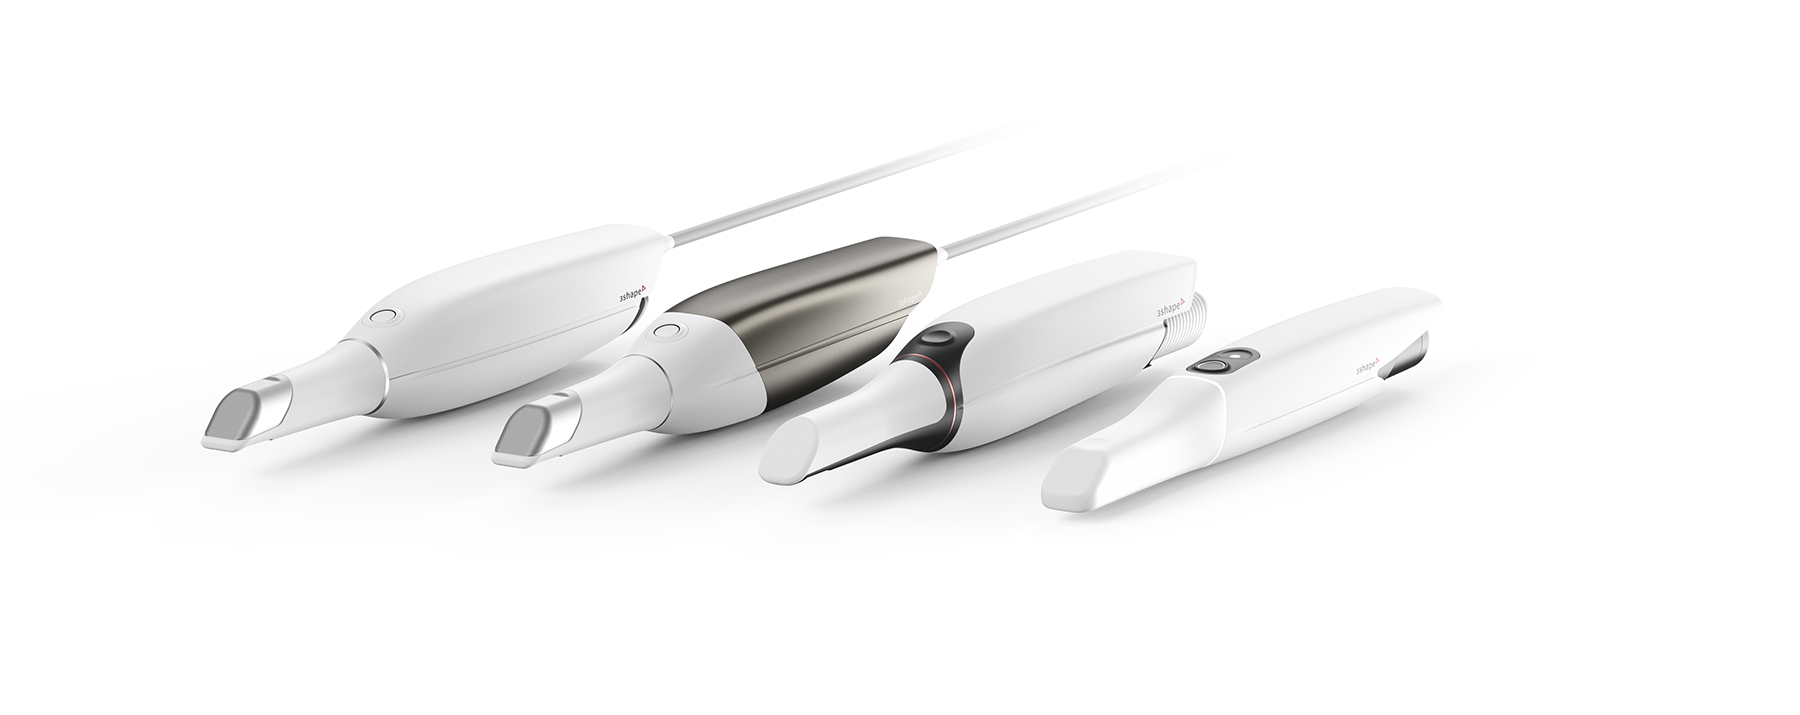 3Shape Launches Updated TRIOS Intraoral Scanner Solutions at 3Shape Discover Event | Image Credit: © 3Shape